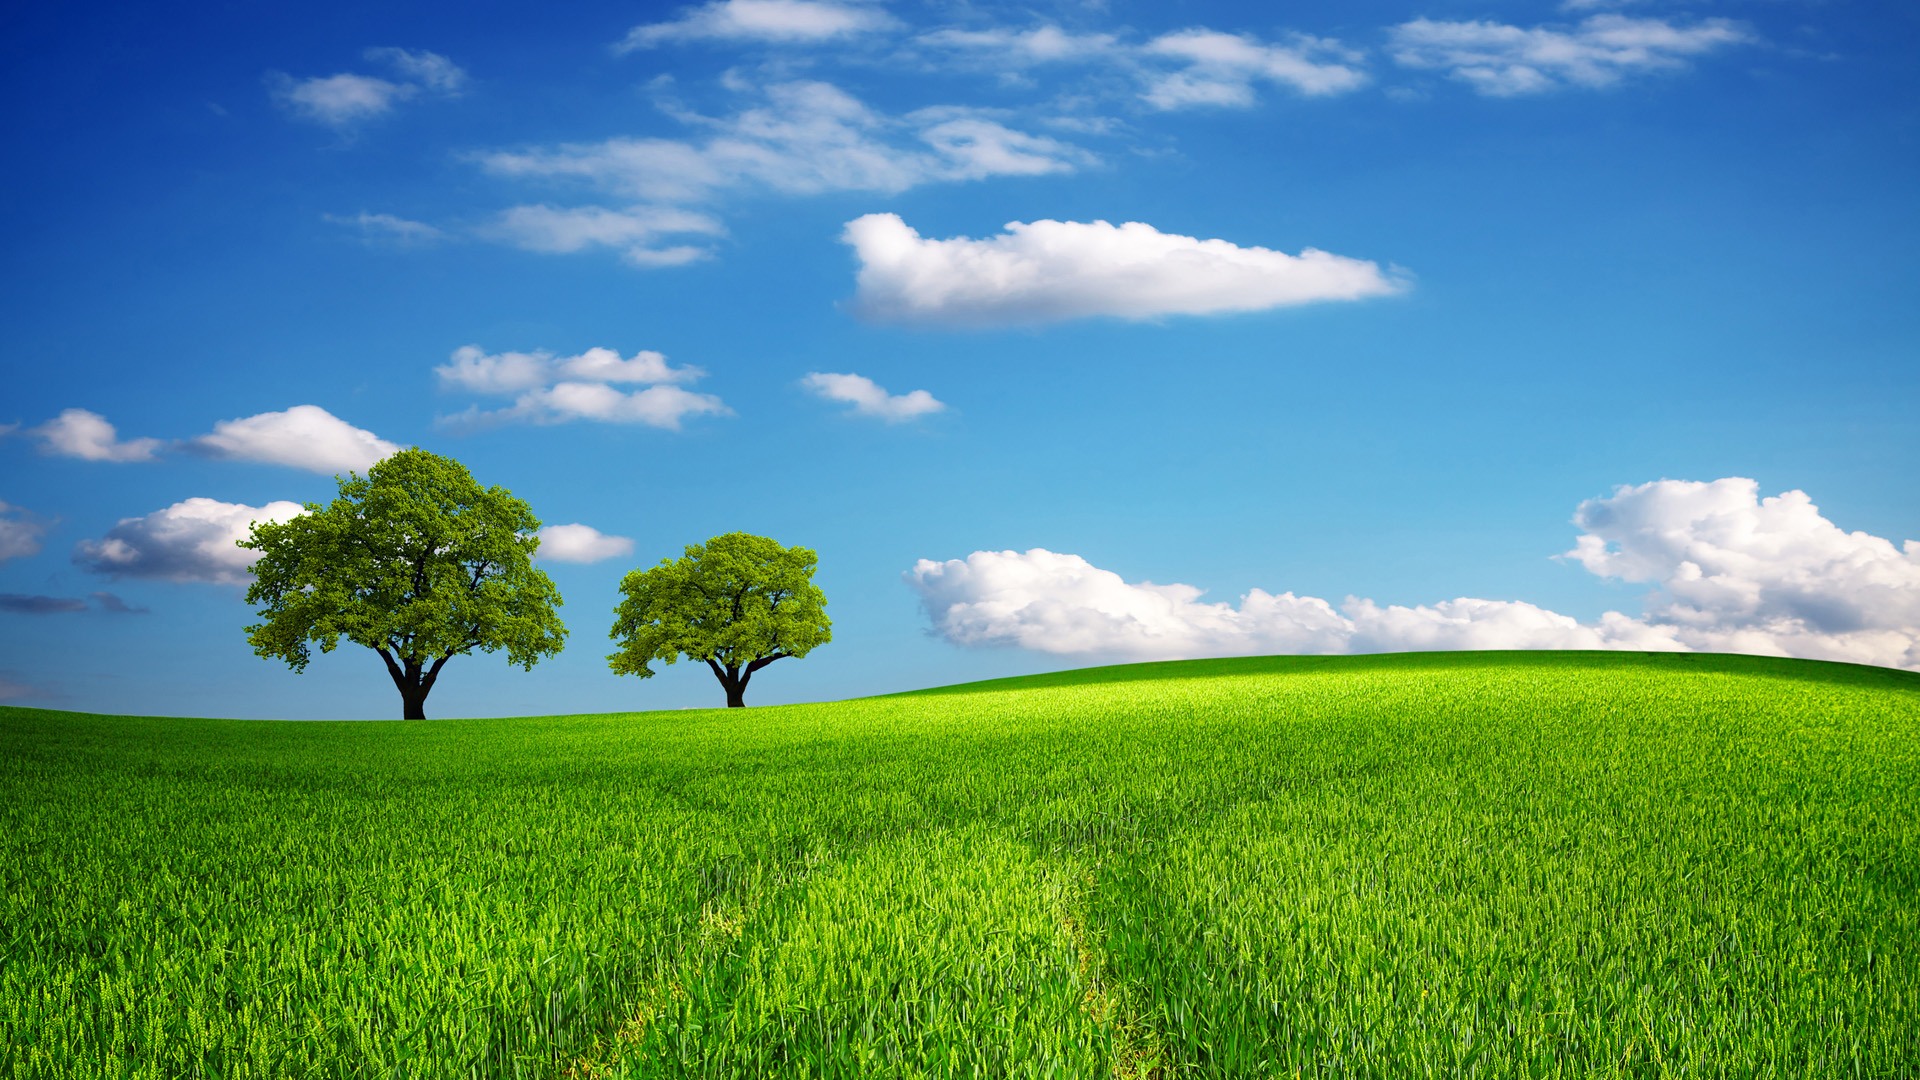 green field wallpaper,natural landscape,green,people in nature,sky,nature